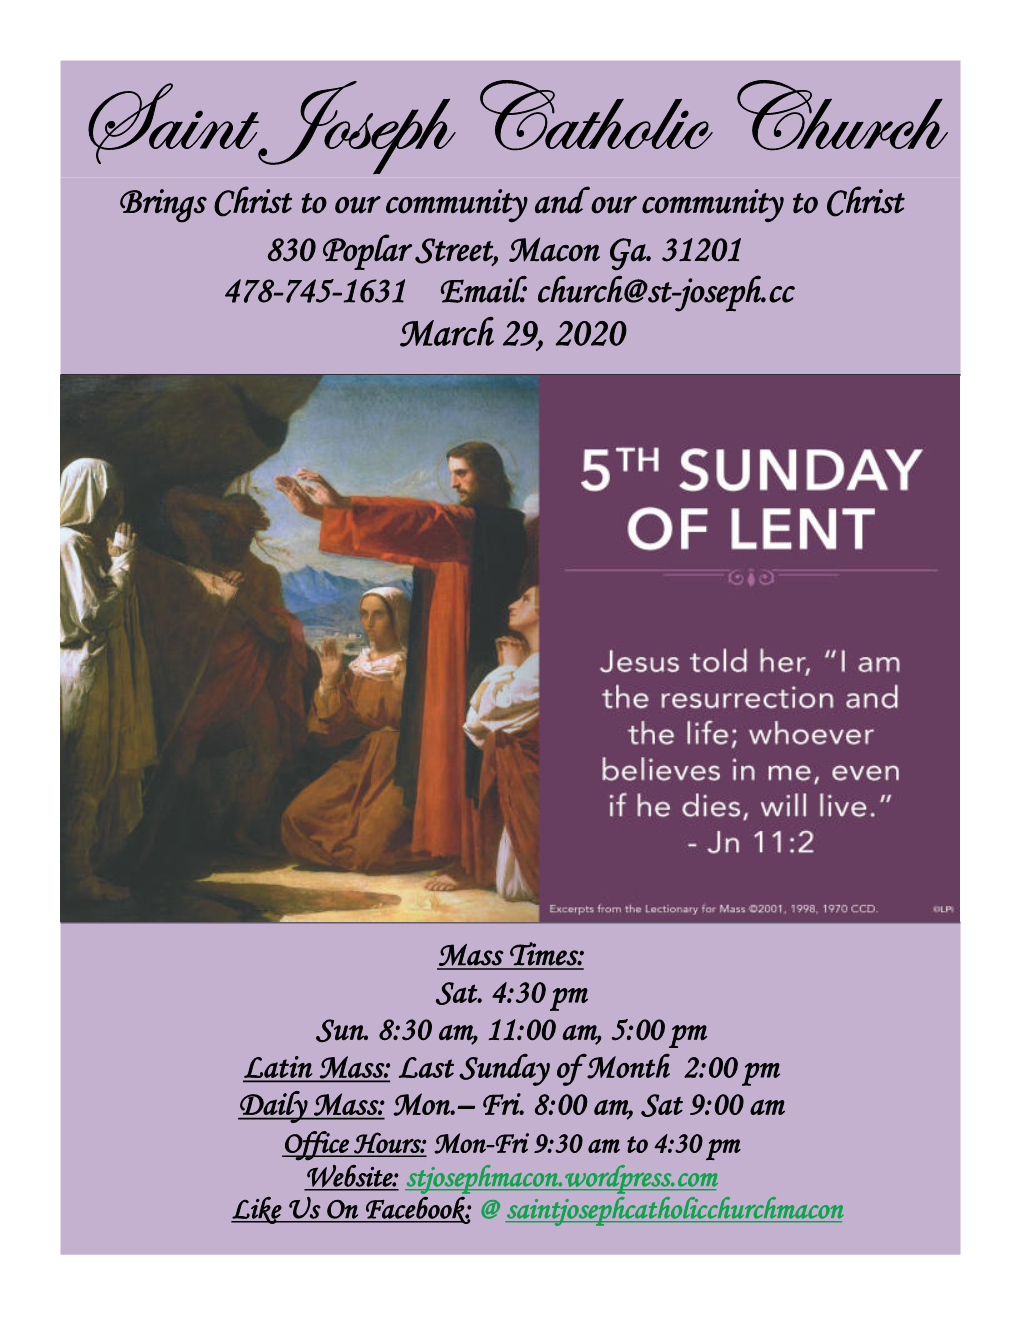 Saint Joseph Catholic Church Brings Christ to Our Community and Our Community to Christ